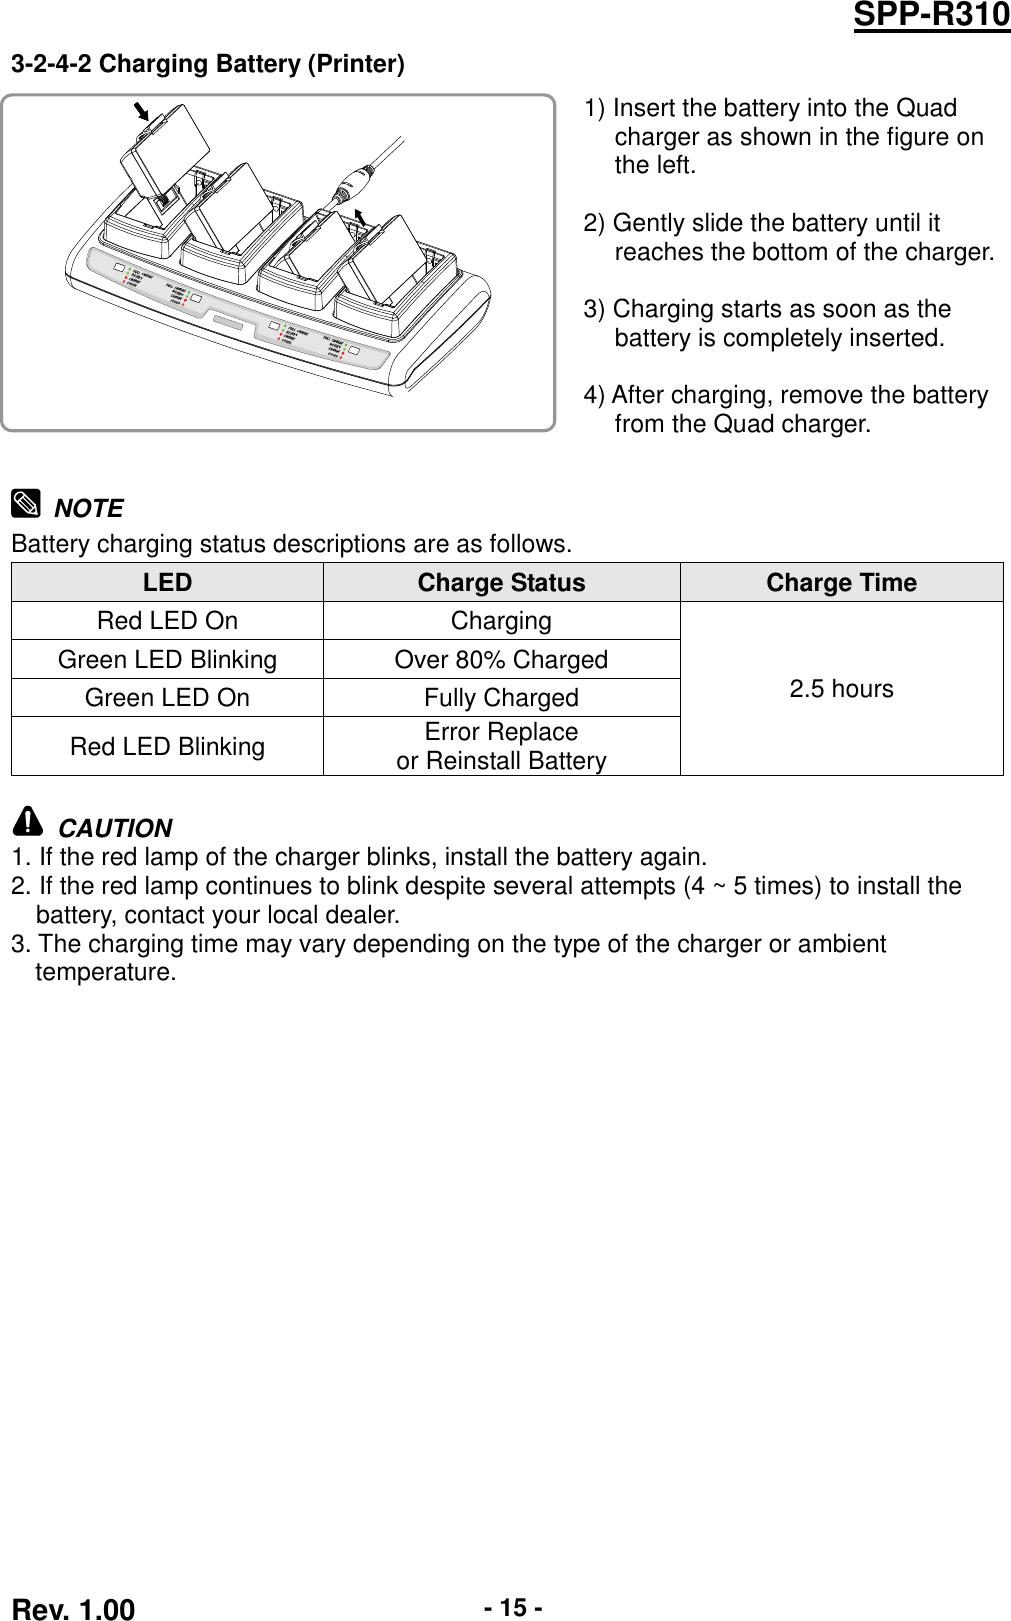  Rev. 1.00 - 15 - SPP-R310 3-2-4-2 Charging Battery (Printer)   1) Insert the battery into the Quad charger as shown in the figure on the left.  2) Gently slide the battery until it reaches the bottom of the charger.  3) Charging starts as soon as the battery is completely inserted.  4) After charging, remove the battery from the Quad charger.    NOTE Battery charging status descriptions are as follows. LED Charge Status Charge Time Red LED On Charging 2.5 hours Green LED Blinking Over 80% Charged Green LED On Fully Charged Red LED Blinking Error Replace   or Reinstall Battery   CAUTION 1. If the red lamp of the charger blinks, install the battery again. 2. If the red lamp continues to blink despite several attempts (4 ~ 5 times) to install the   battery, contact your local dealer. 3. The charging time may vary depending on the type of the charger or ambient   temperature.   